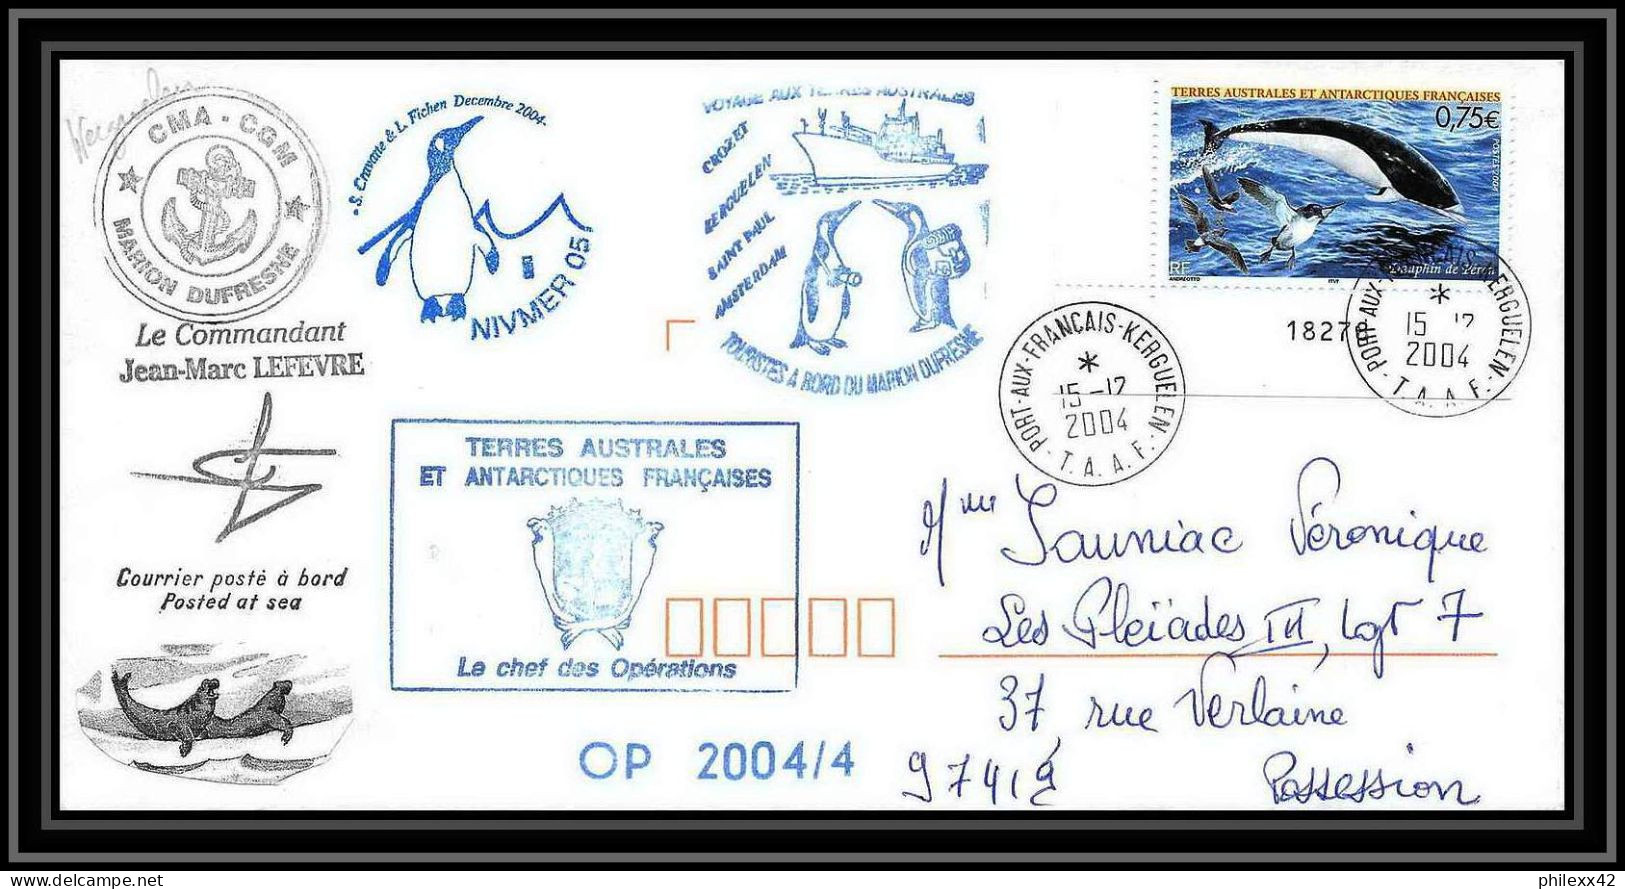 2477 ANTARCTIC Terres Australes TAAF Lettre Cover Dufresne 2 Signé Signed OP 2004/4 N°385 Possession Reunion Dauphin - Antarktis-Expeditionen